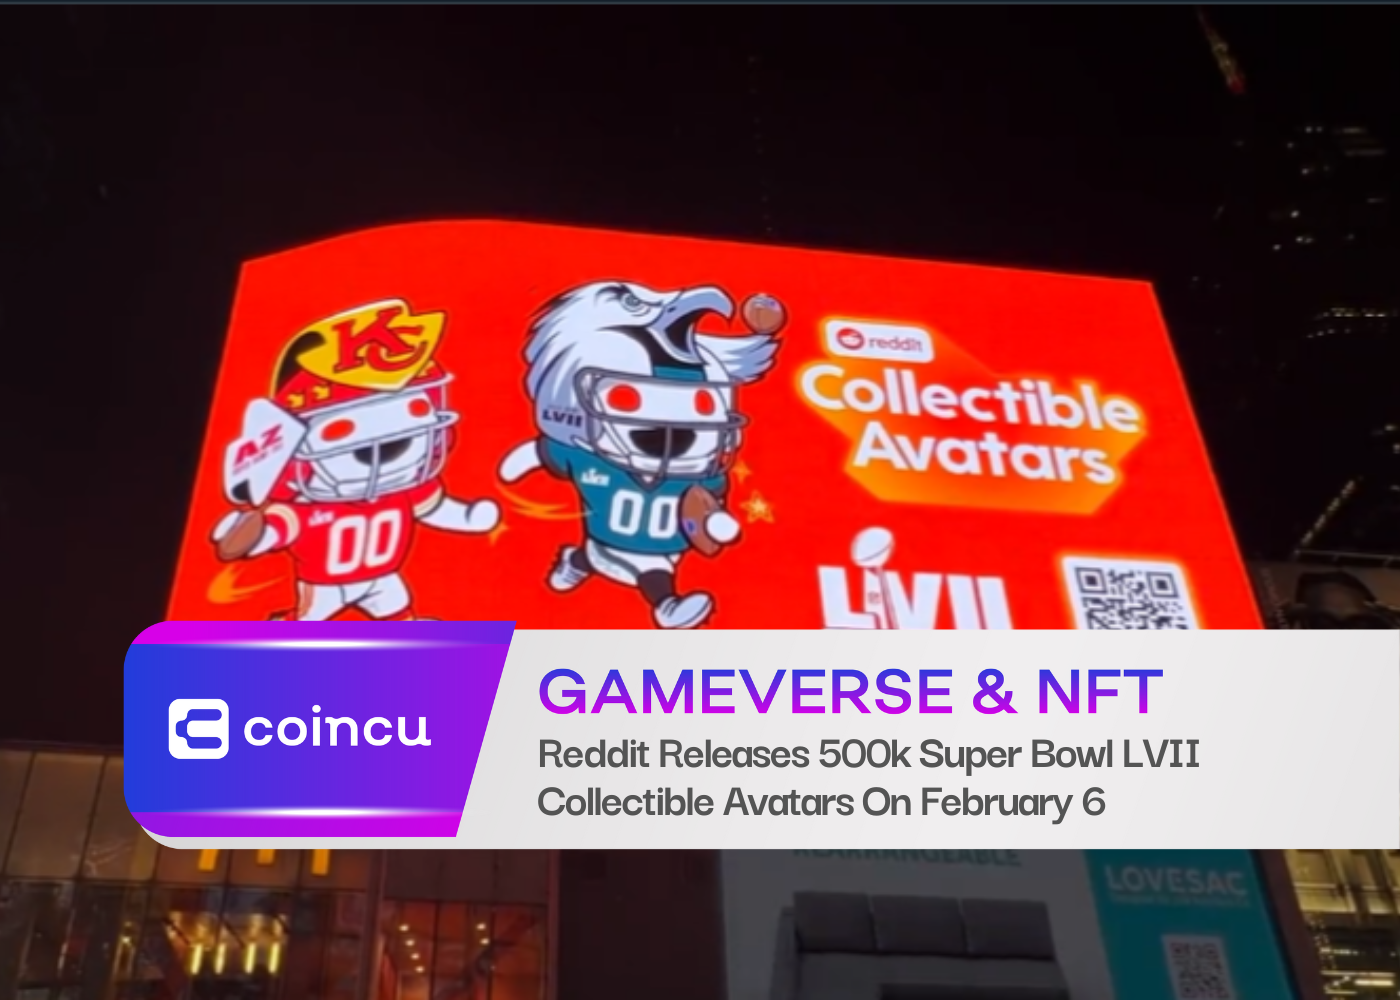 Reddit Releases 500k Super Bowl LVII Collectible Avatars On February 6